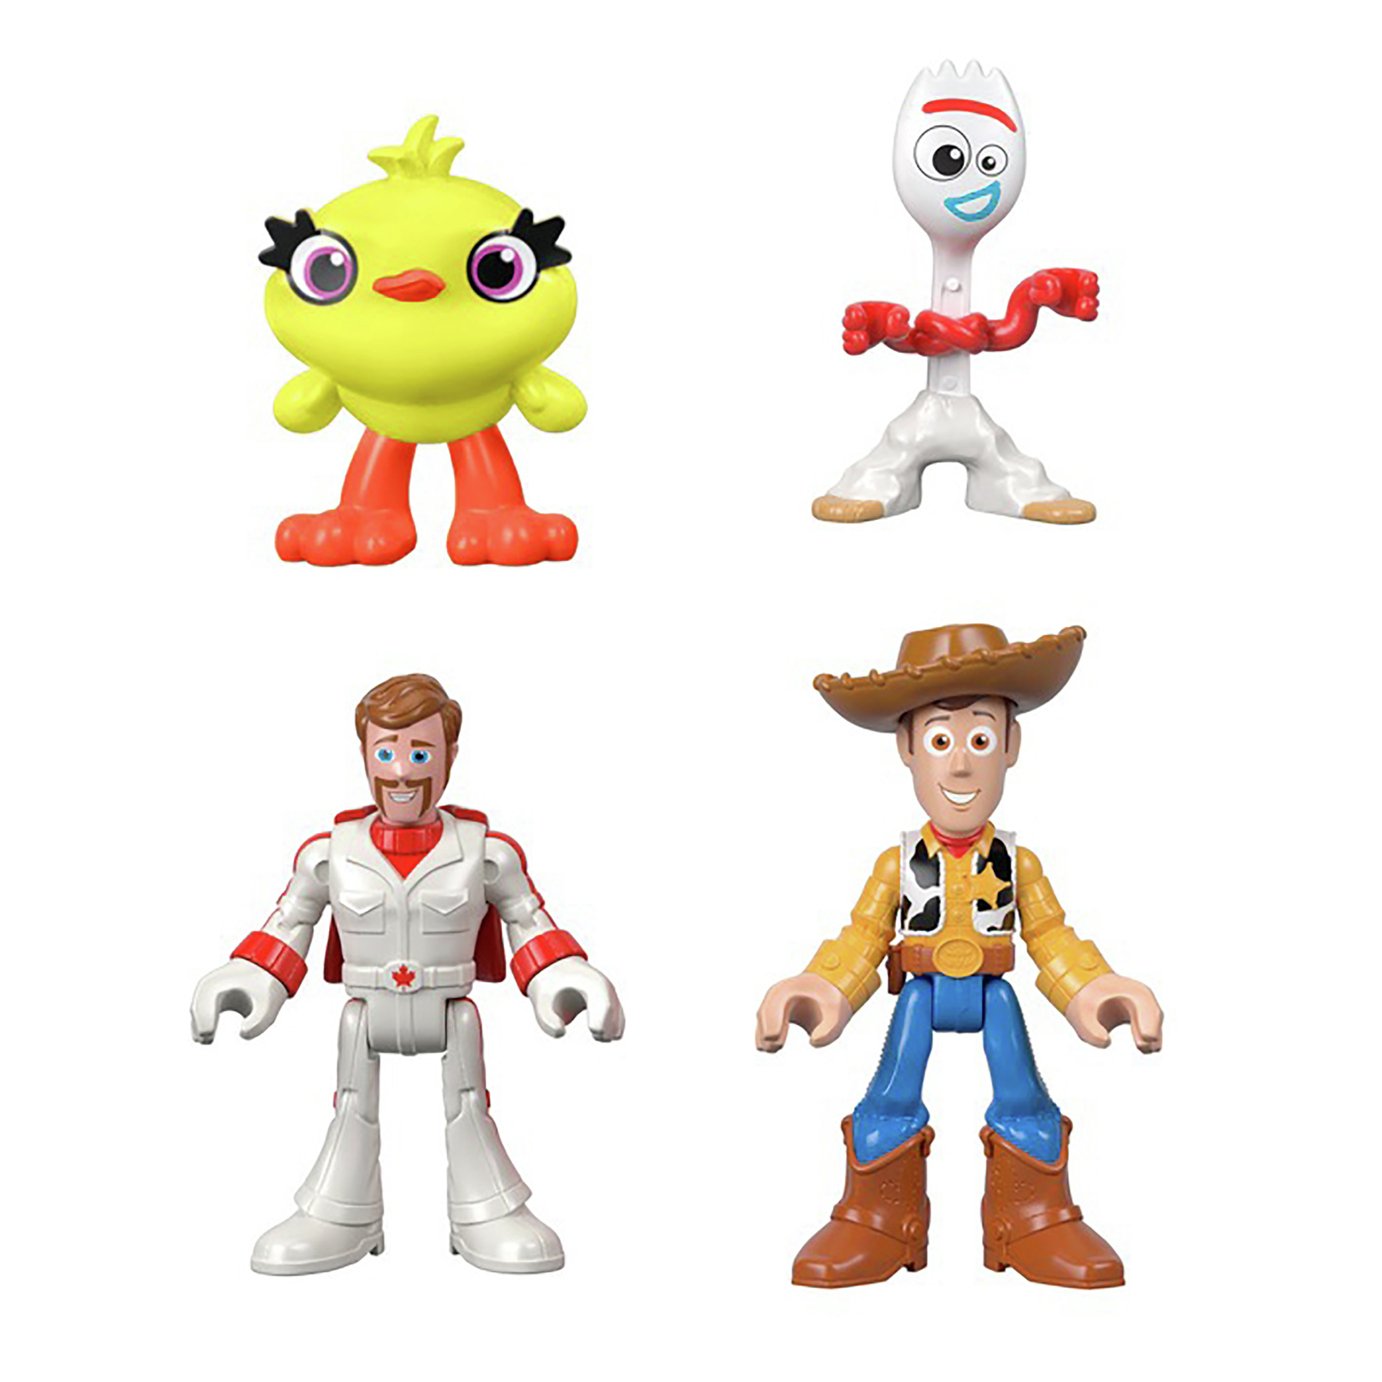 Toy Story 4 Imaginext Deluxe 8 Pack Figure Set Review